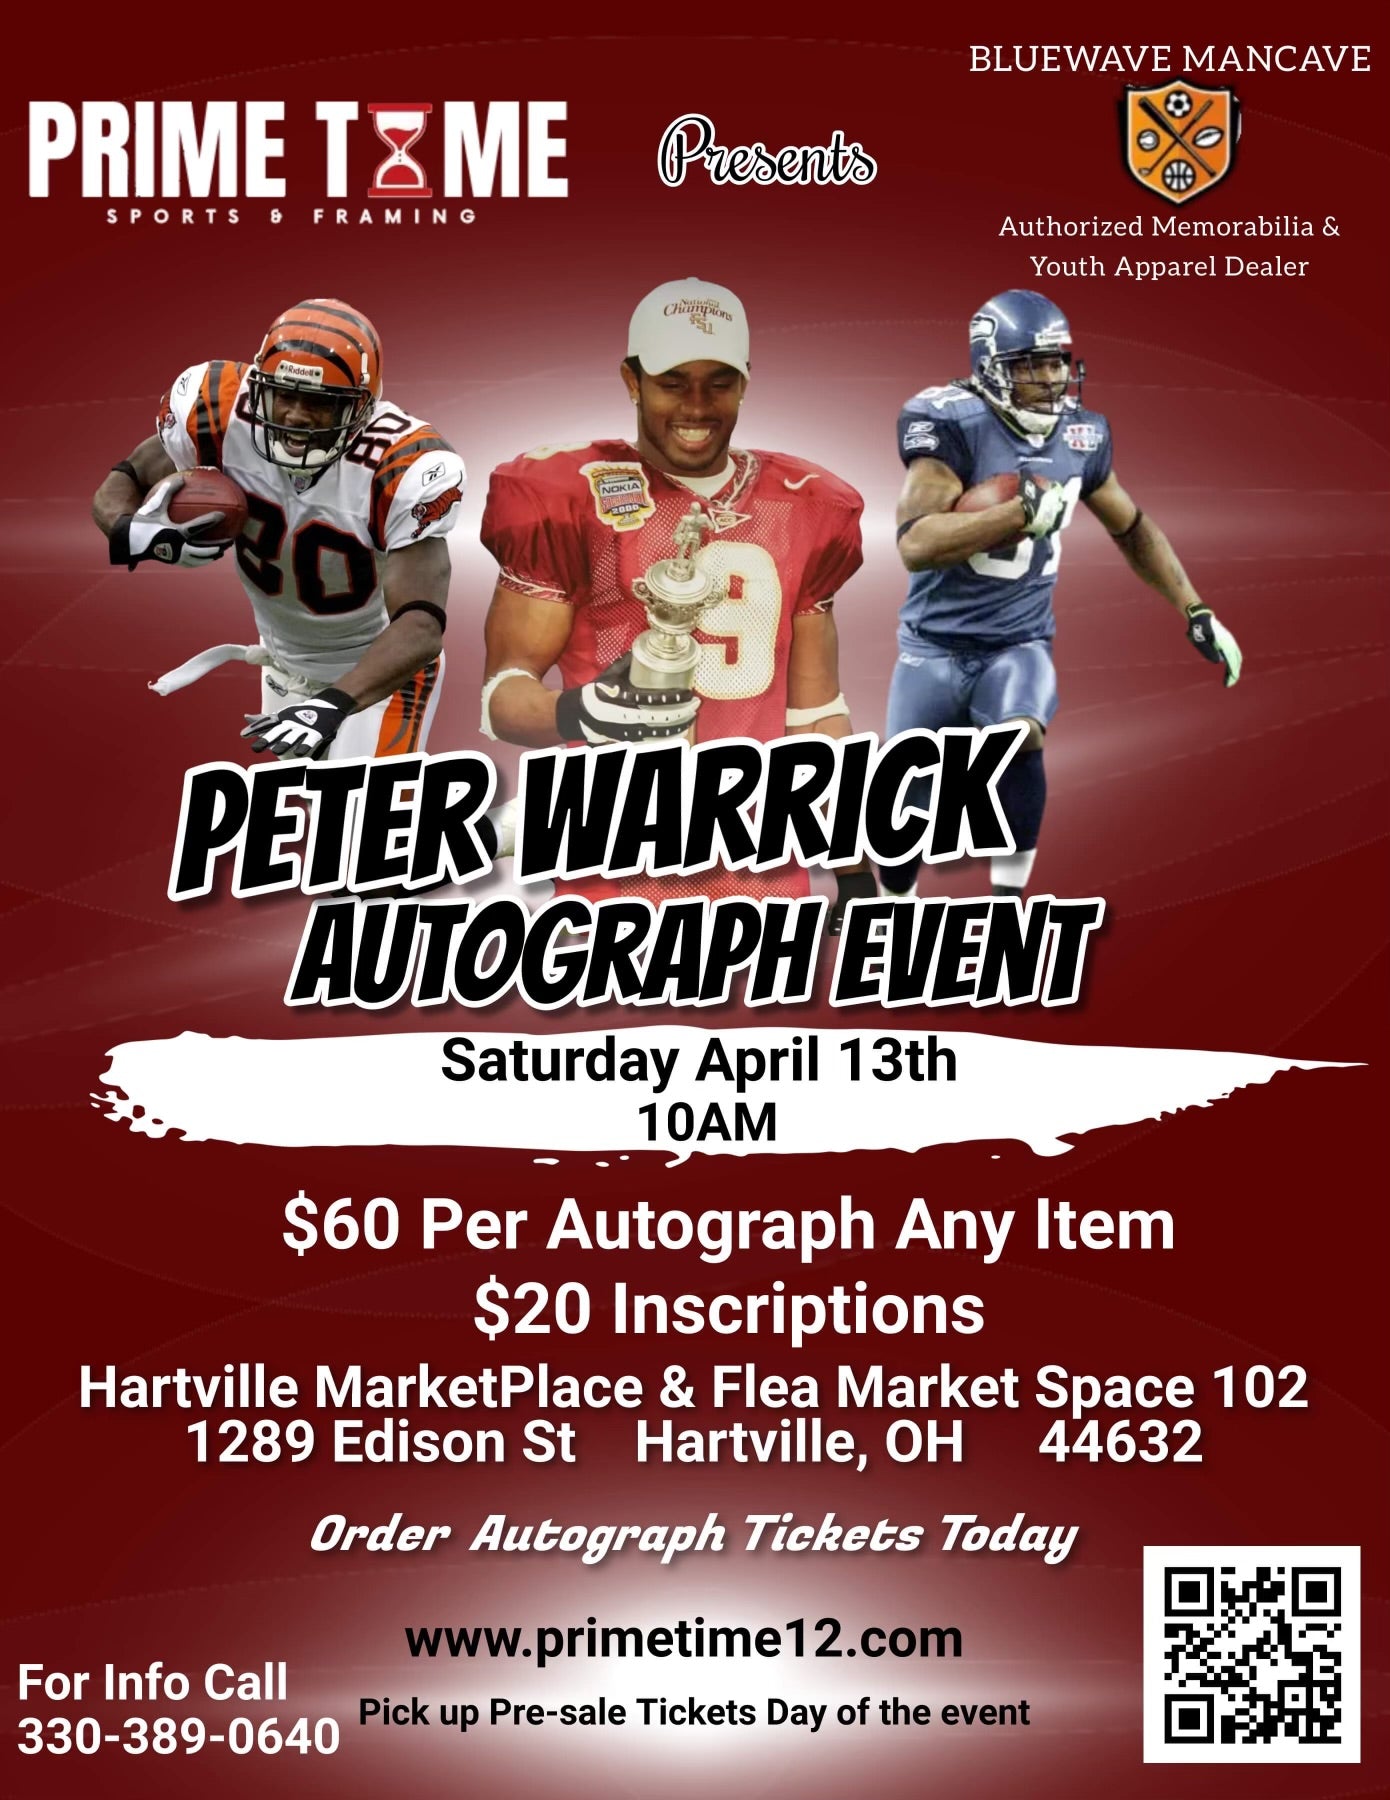 Peter Warrick Pre-Sale ticket for autograph signing on any 1 item